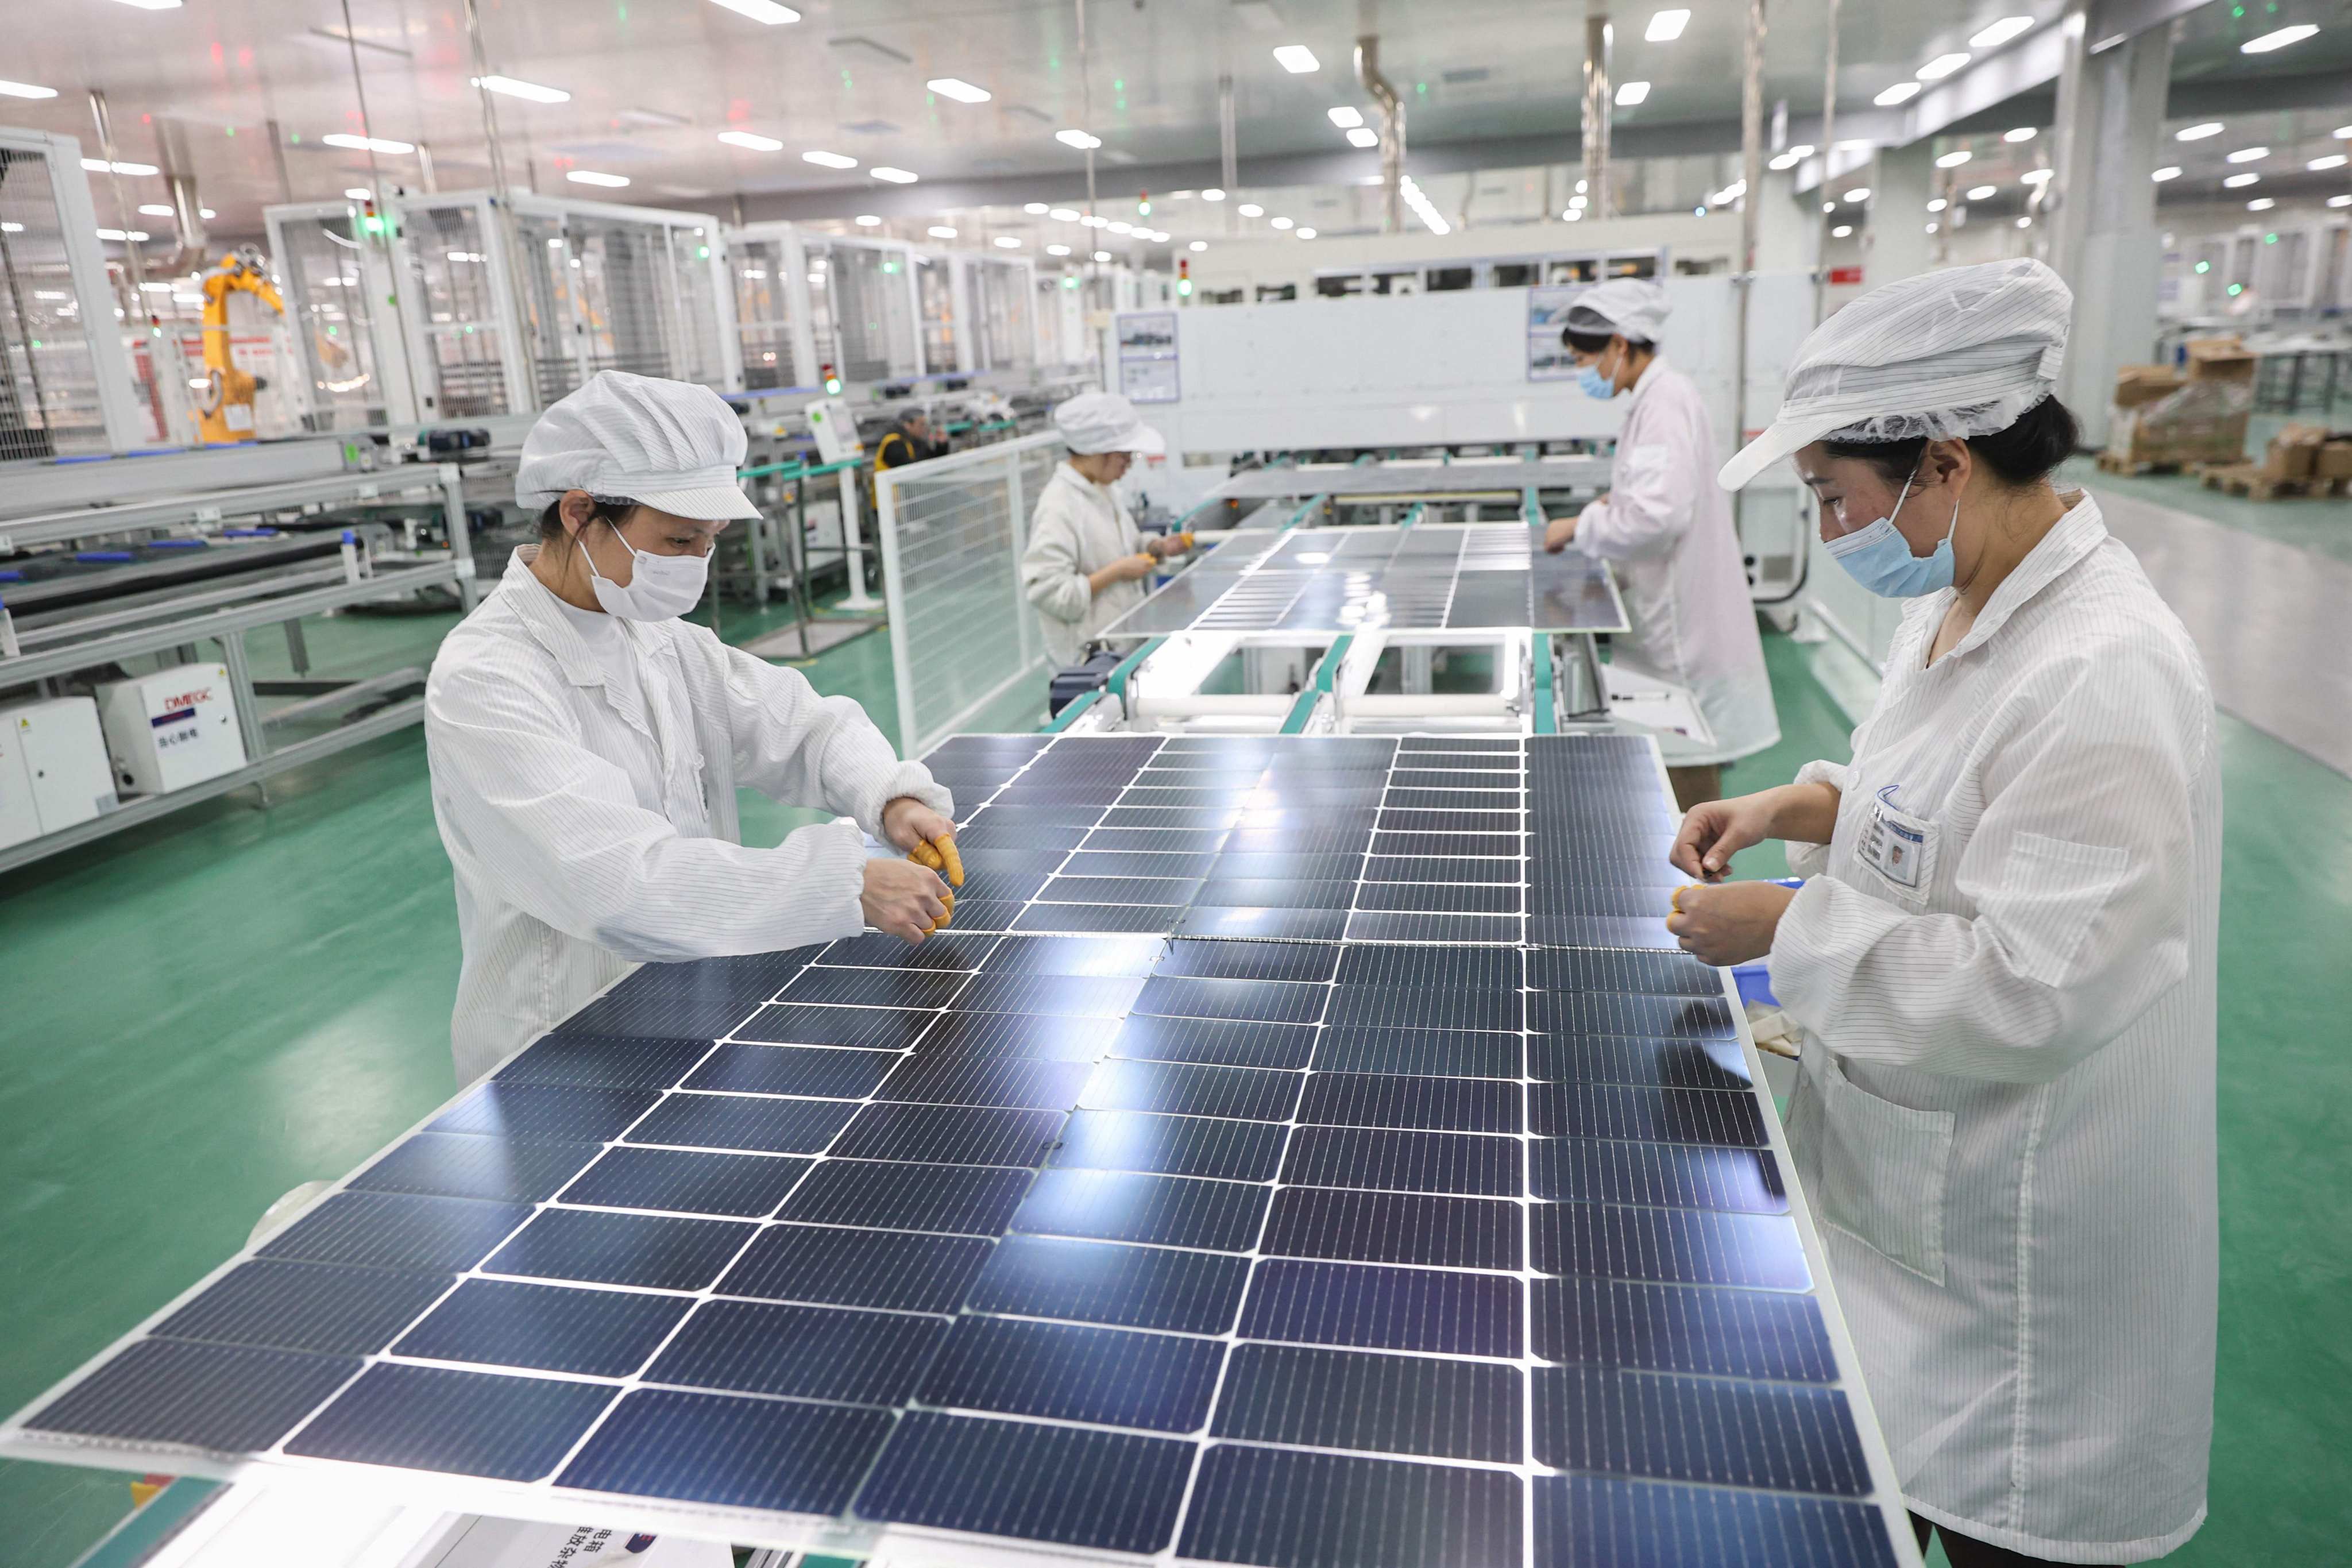 China’s export growth was driven in large part by high-demand goods related to new energy, such as solar panels. Photo: AFP